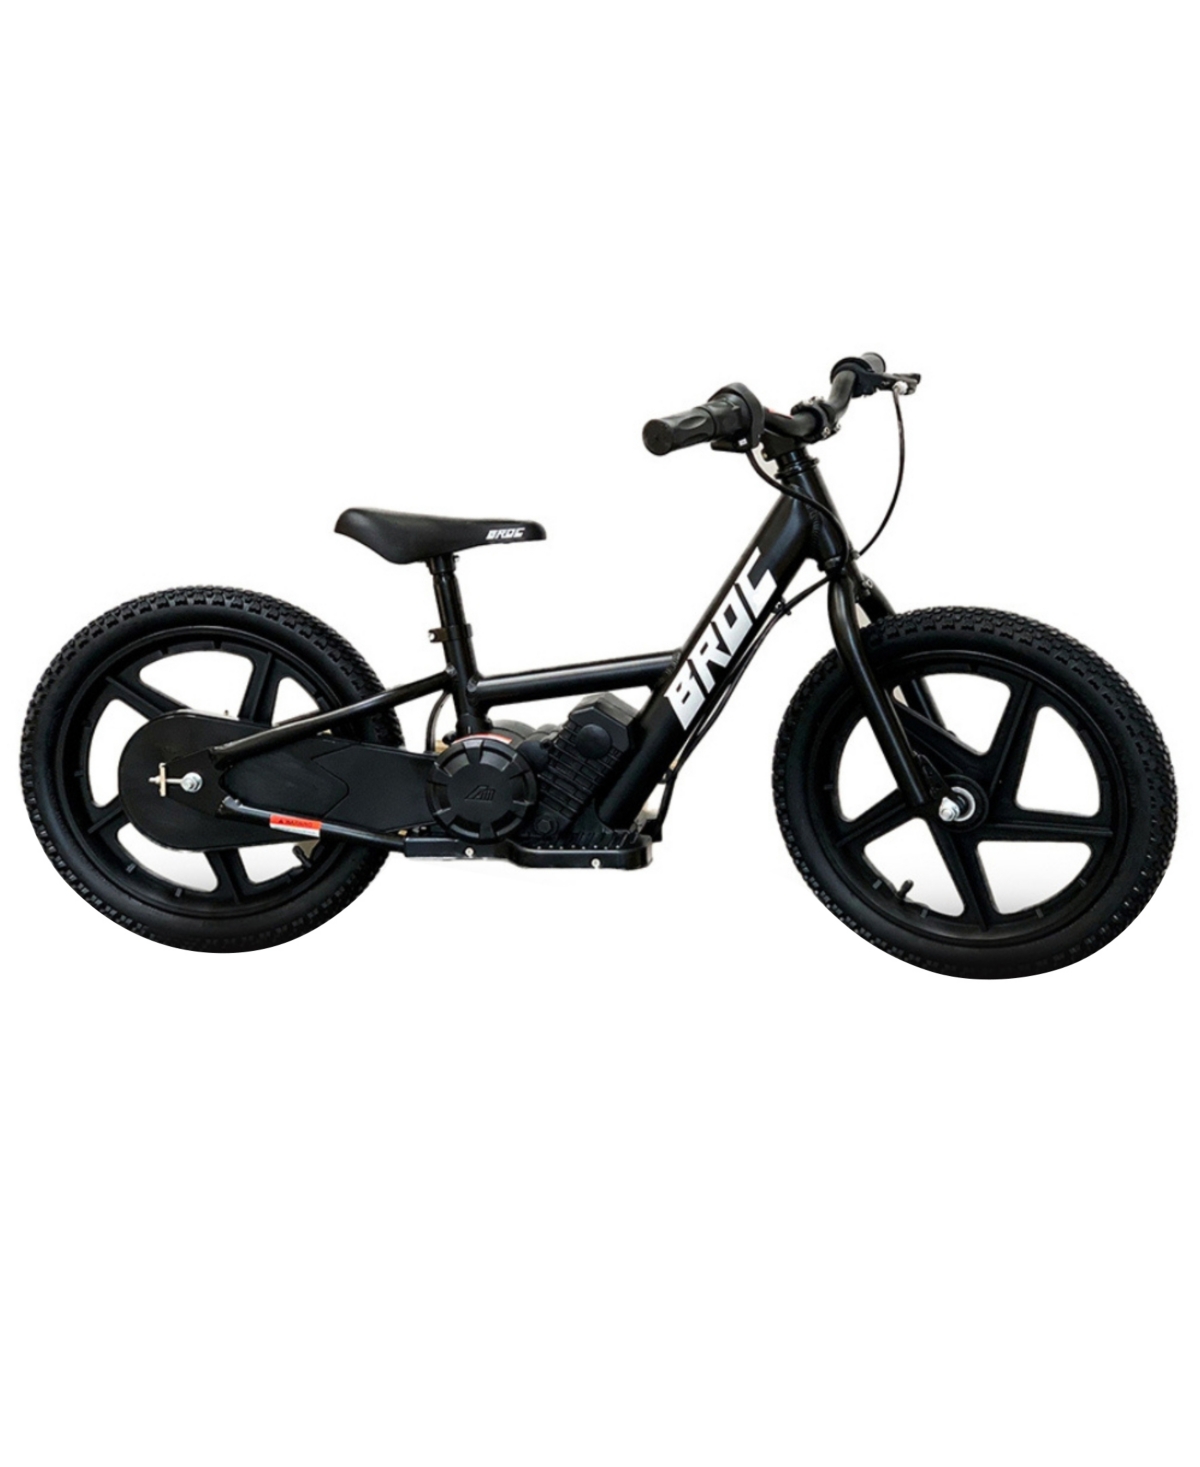 Shop Best Ride On Cars Broc Usa E-bikes D16 Powered Ride-on In Black